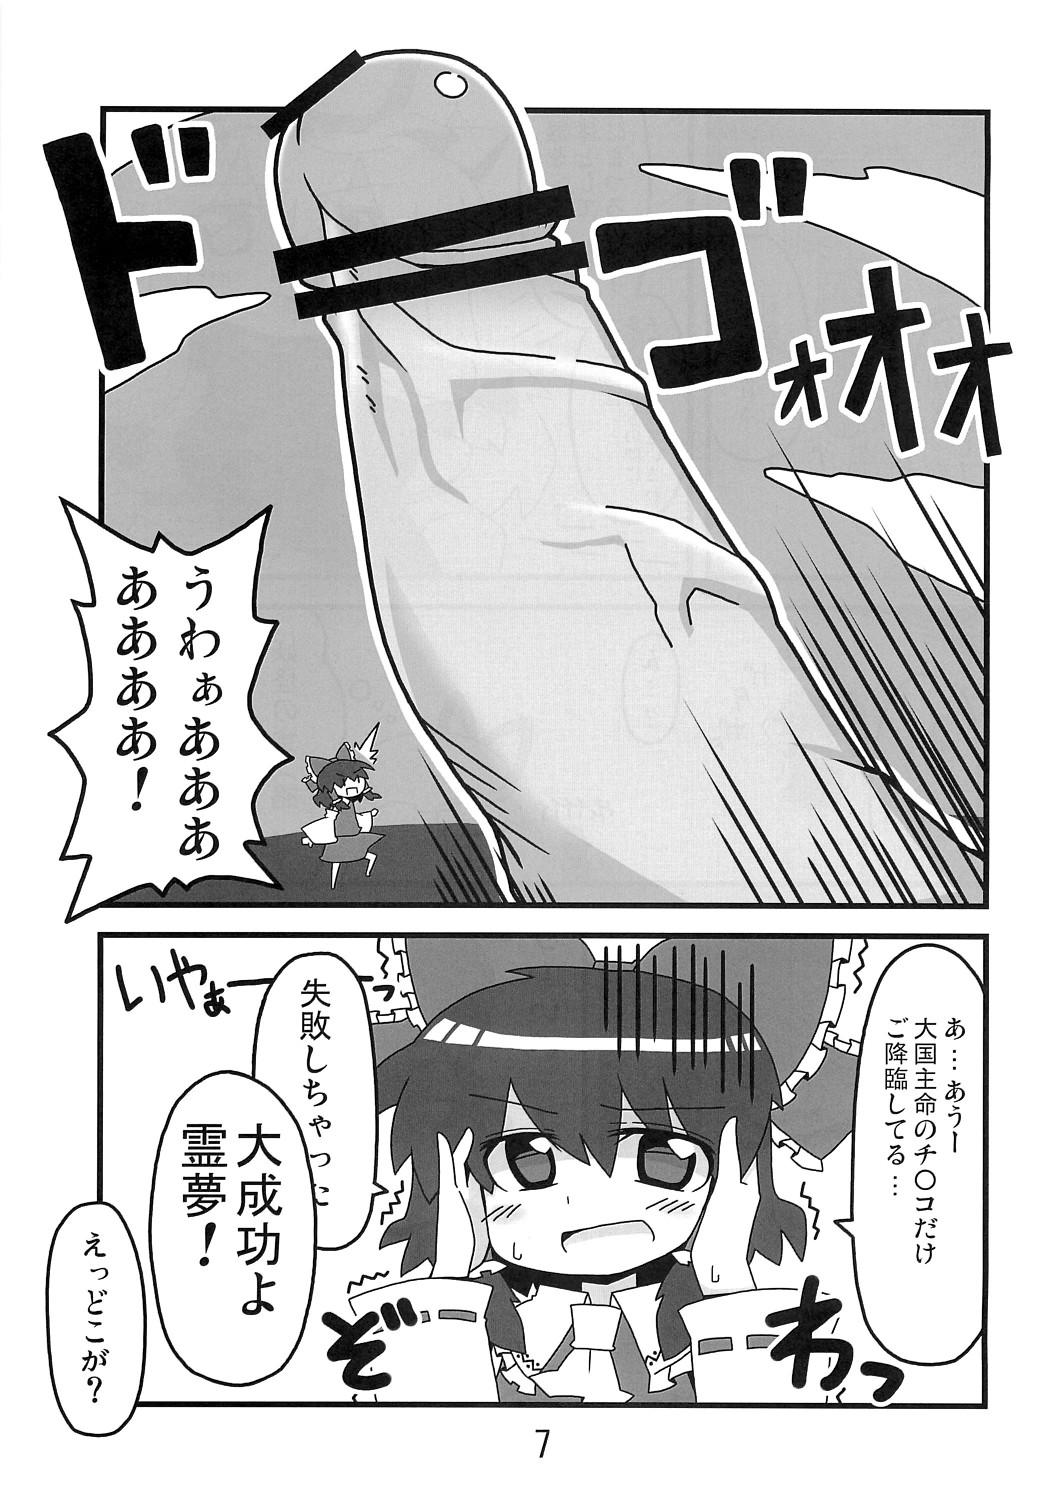 Boy Fuck Girl 東方豊年祭 - Touhou project Spank - Page 6